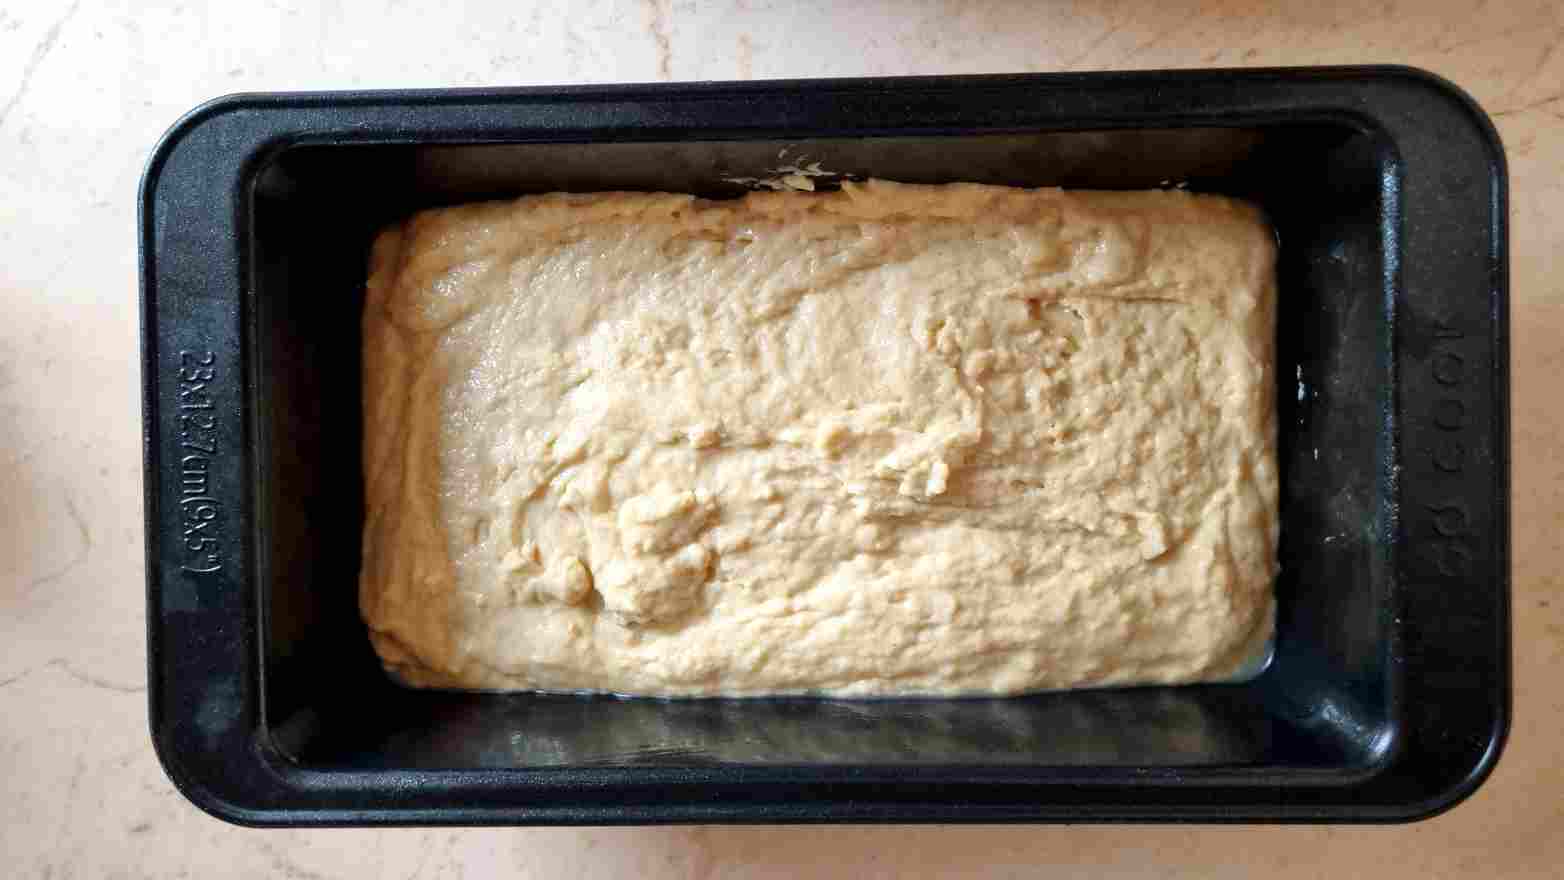 The dough in the bread pan before the rise.